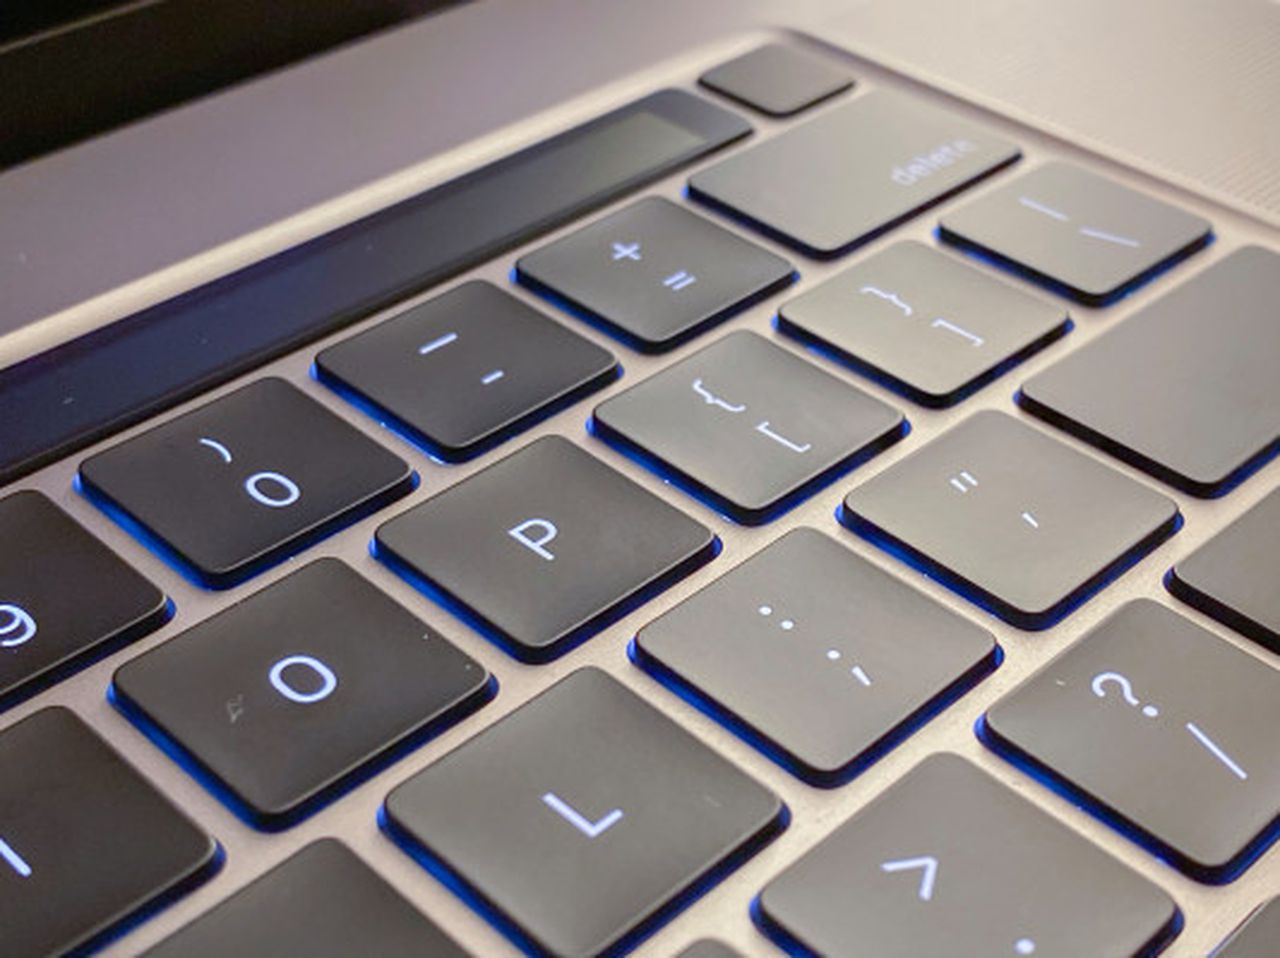 Apple could announce new MacBook models with scissor-switch keyboards soon – TechCrunch